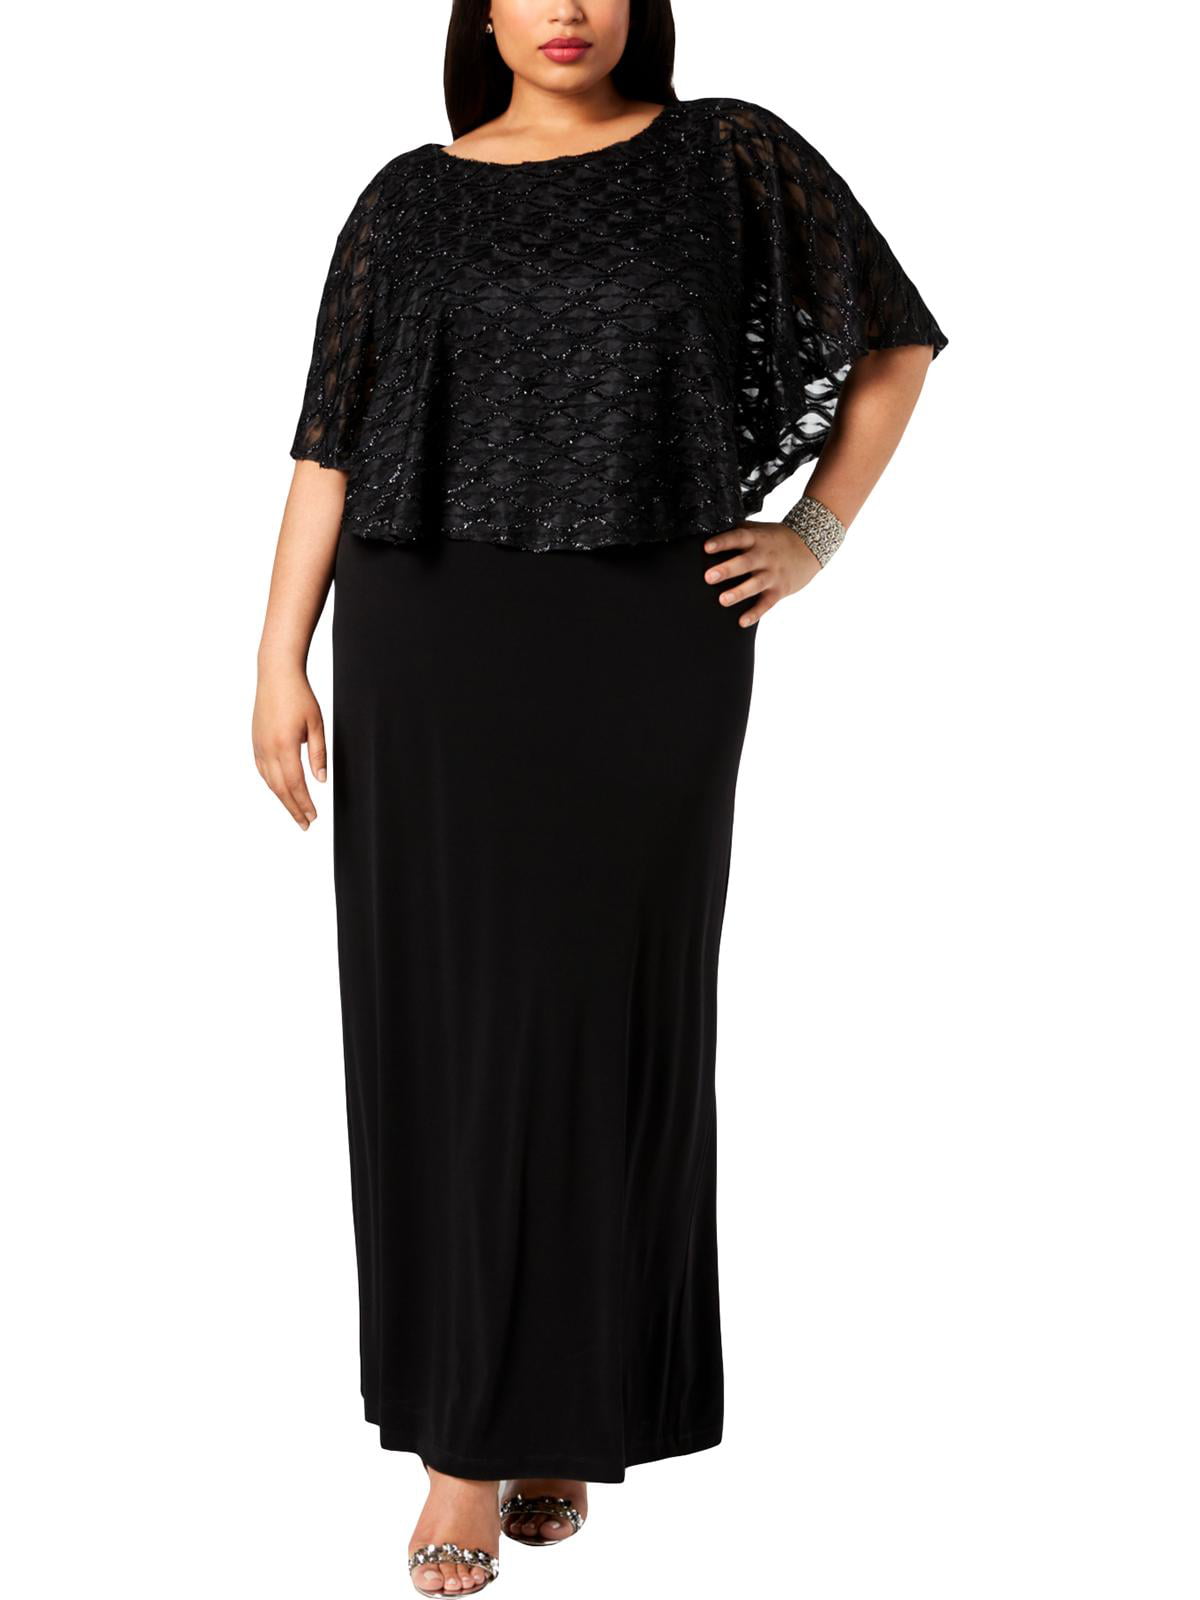 Connected Apparel - Connected Apparel Womens Plus Glitter Formal ...